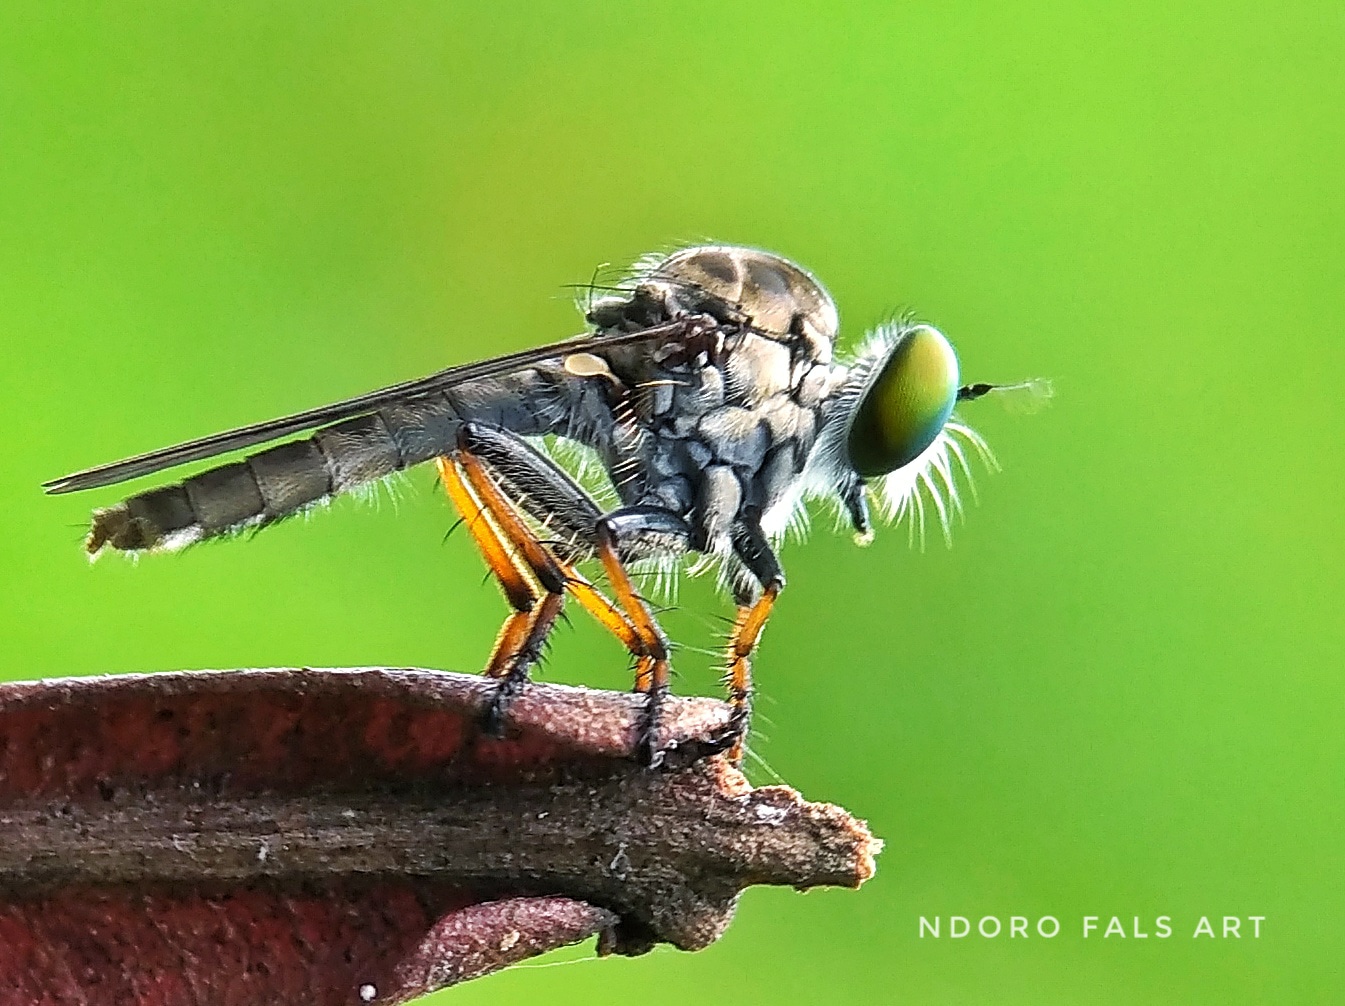 Black Robber Fly Redmi 4a+lens Snapseed Lamteng-INDONESIA 10.02.2018